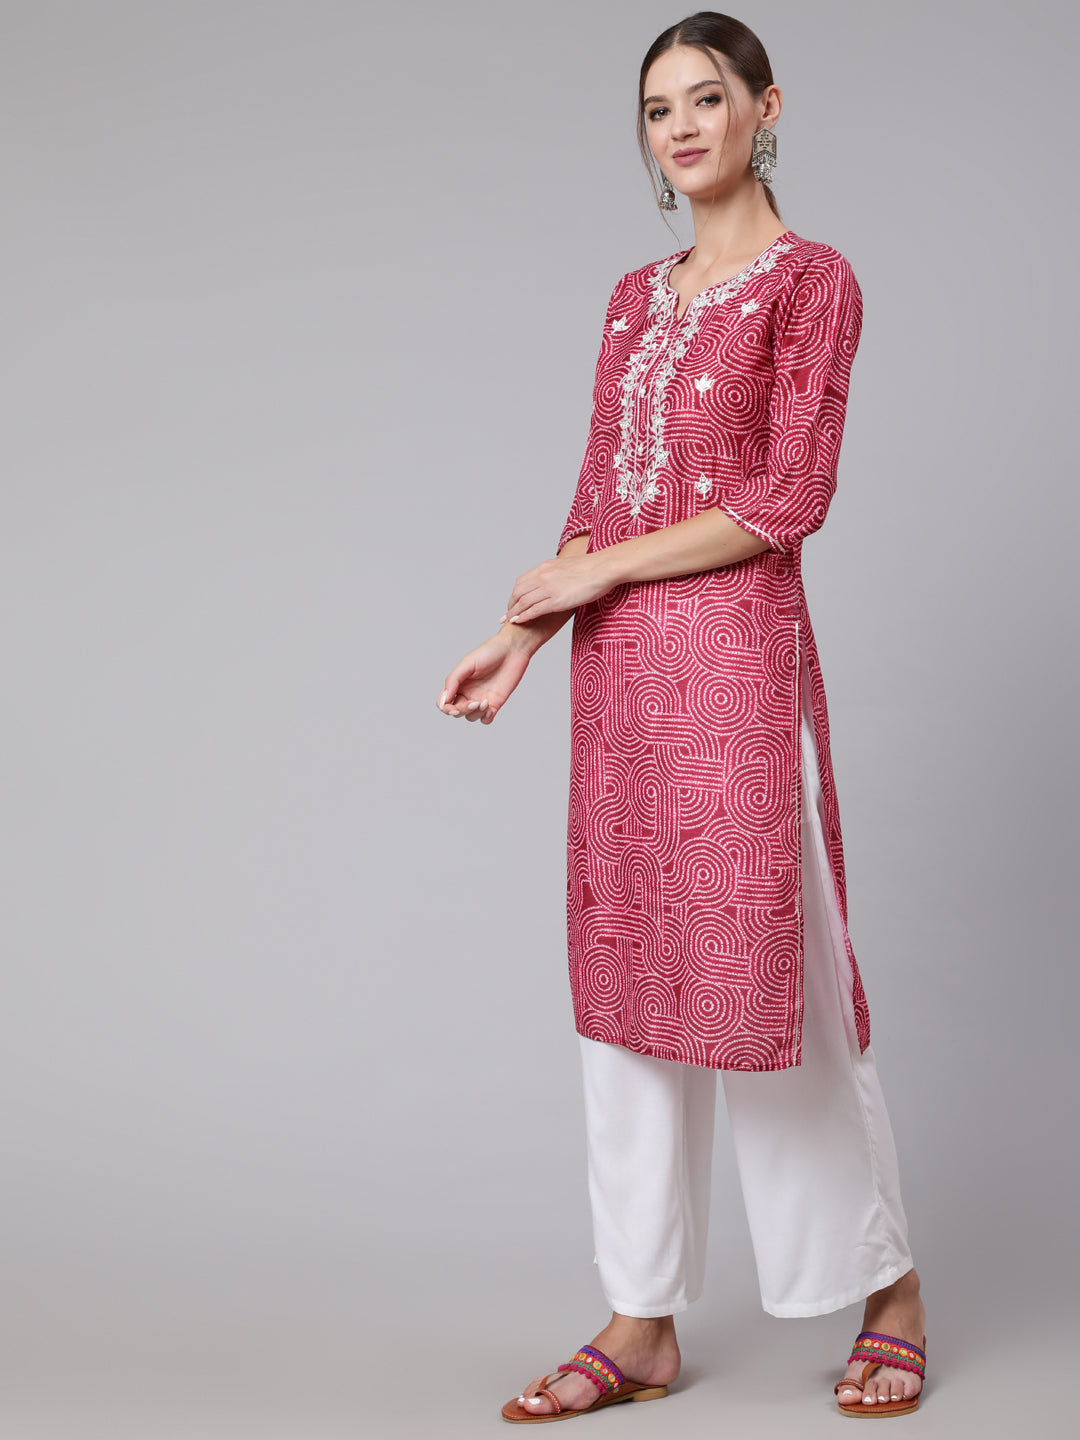 Buy Red Mirror Work Embroidered Muslin Straight Kurta Online. Shop our Latest Collection of Kurti & Suit Sets with Dupatta & Bottomwear for Women at Jaipur kurti